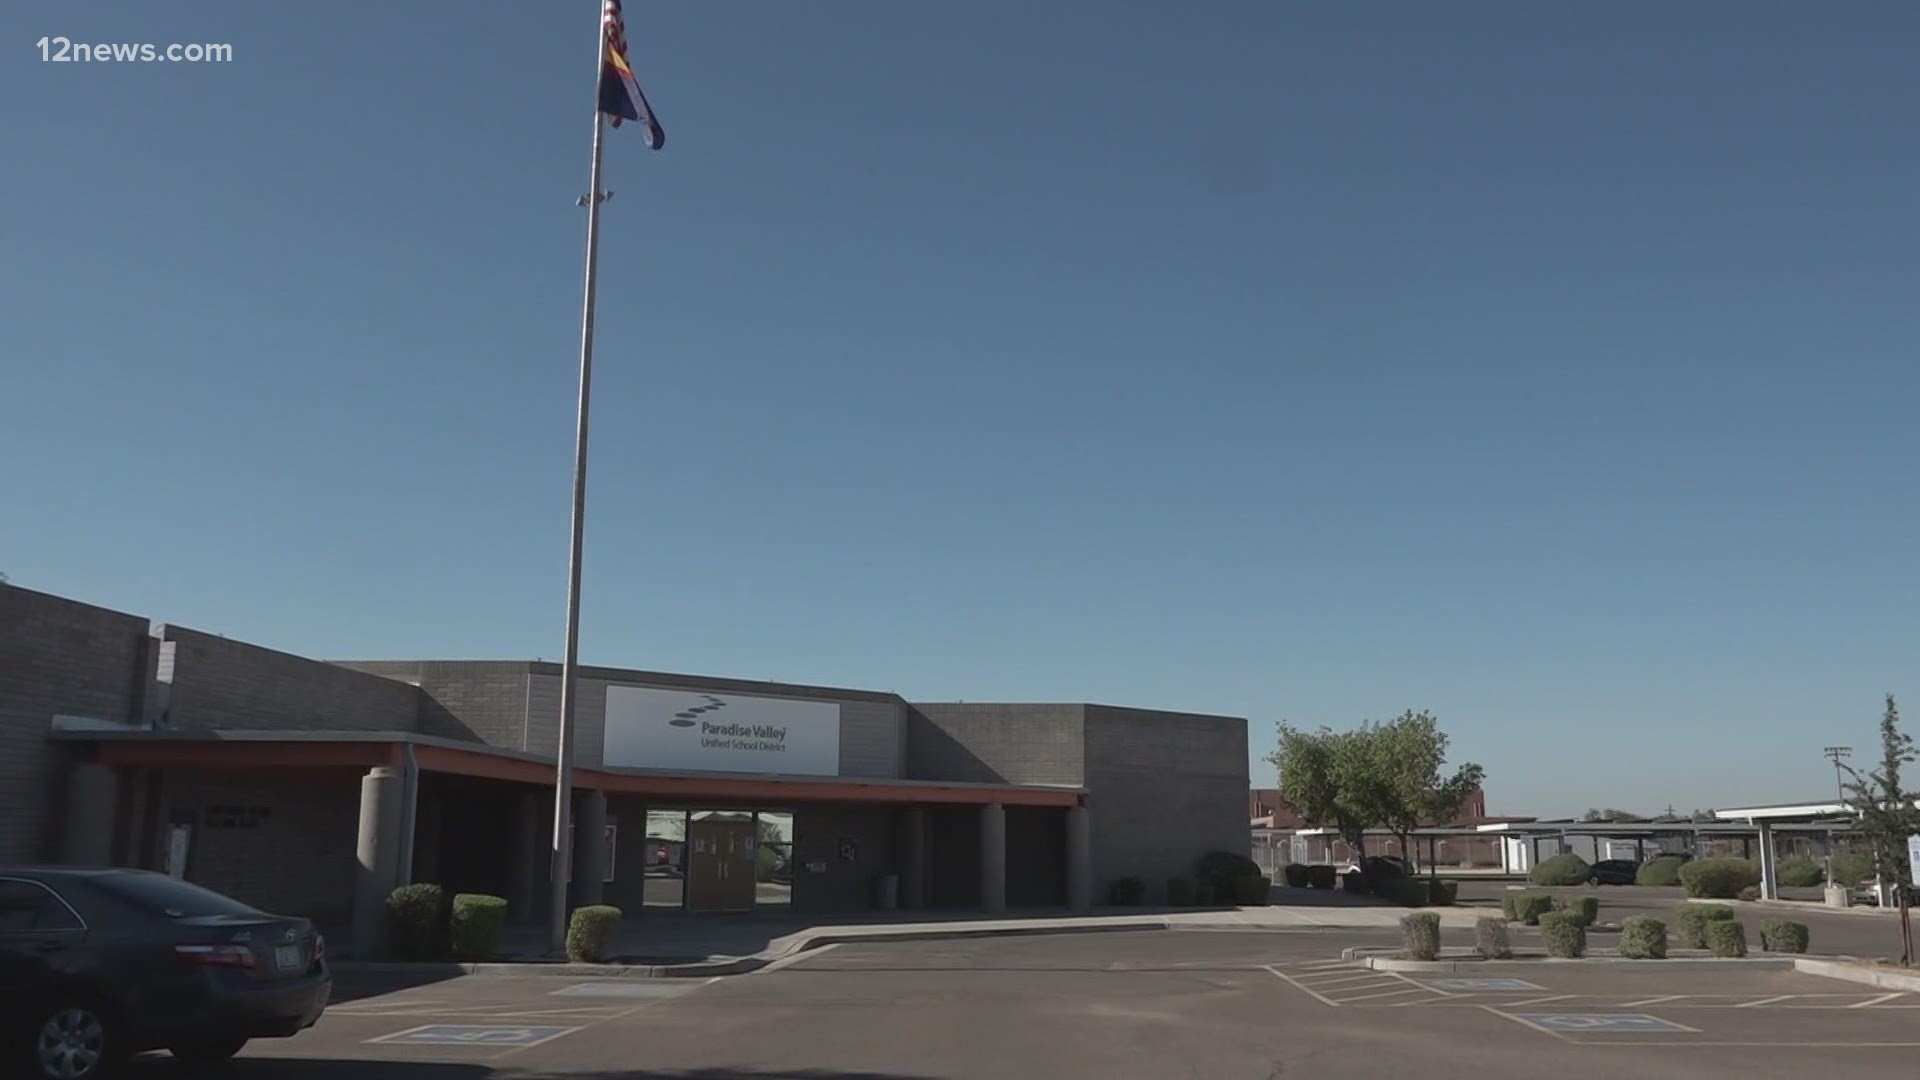 Arizona continues to grapple with an increase in COVID-19 cases, forcing schools and businesses to think about what to do next. Team 12's Jen Wahl has the latest.